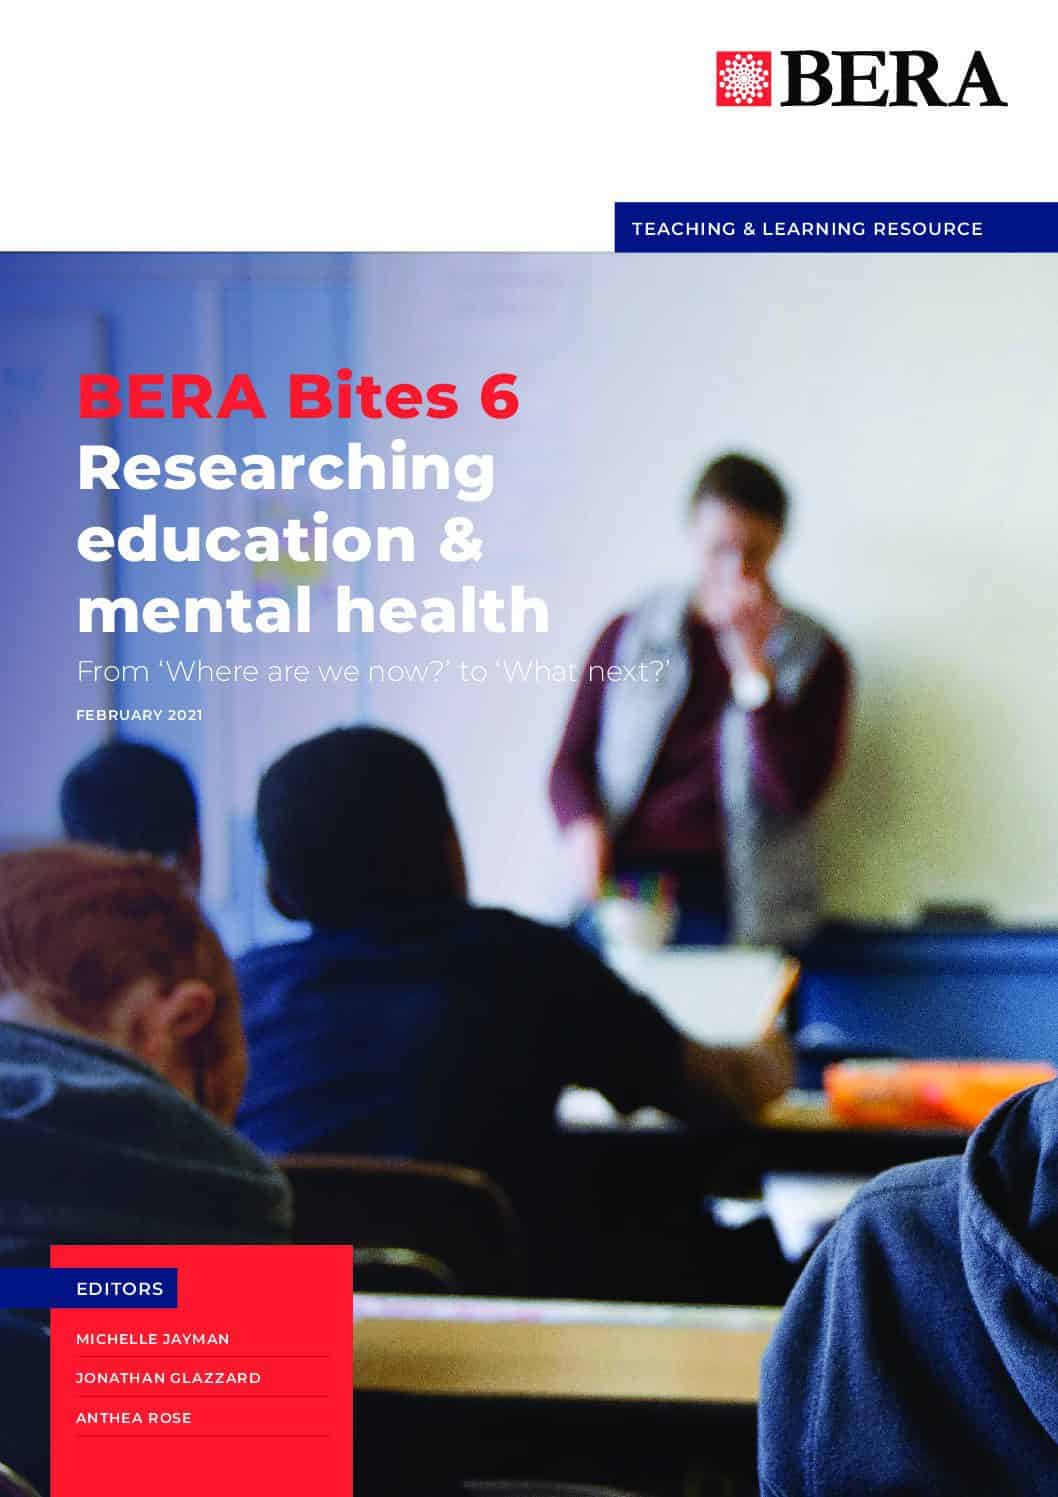 Featured image for “Researching education & mental health: From ‘Where are we now?’ to ‘What next?’”